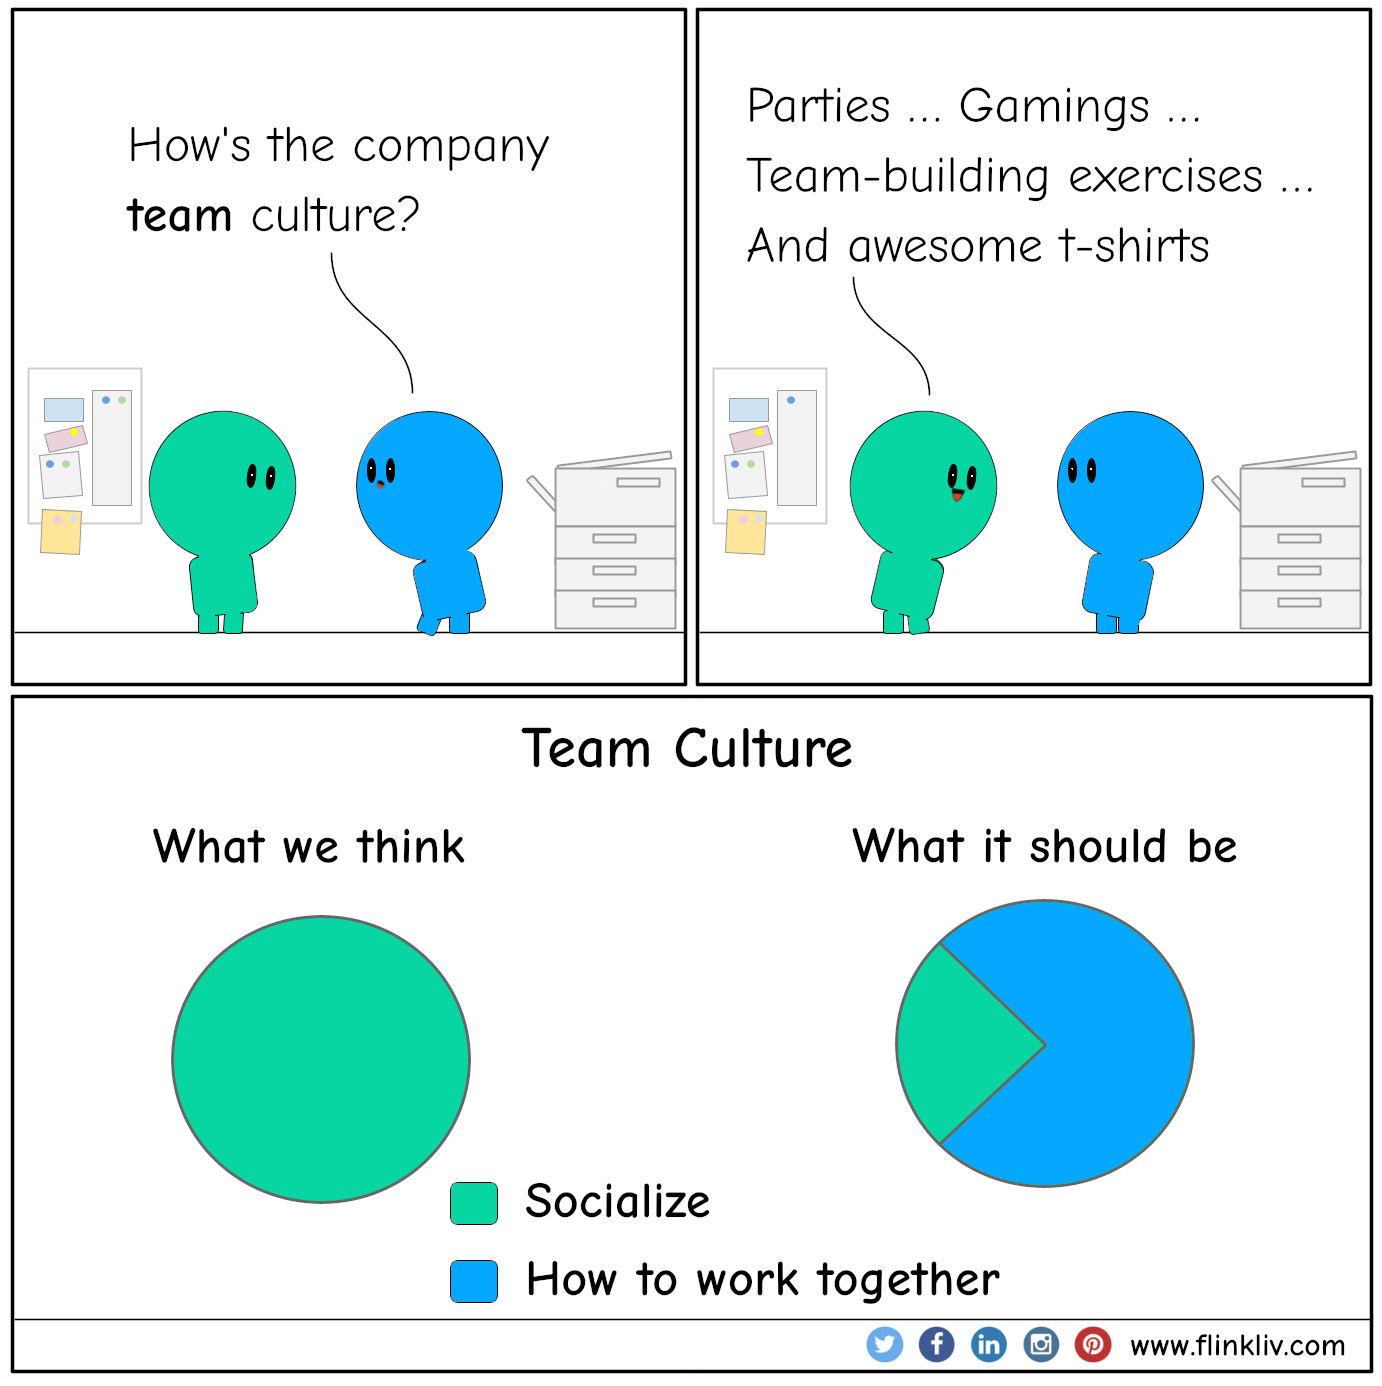 Conversation between A and B about company culture
				A: How's the company team culture? 
				B: Oh boy: parties, gamings, team-building exercises, and awesomeness t-shirts 